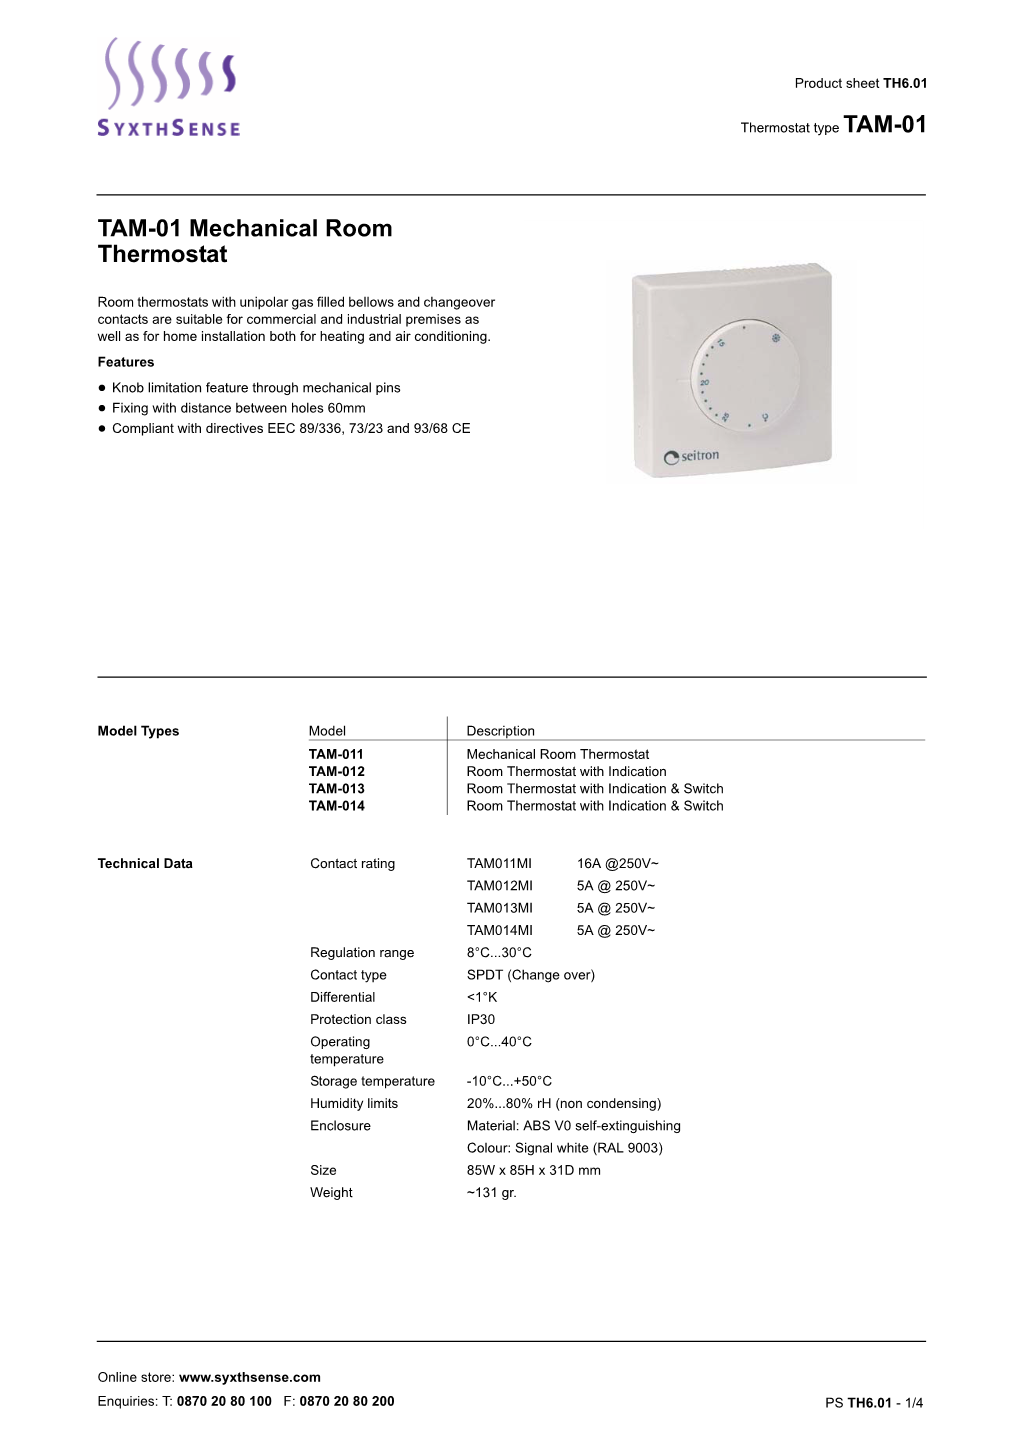 TAM-01 Mechanical Room Thermostat